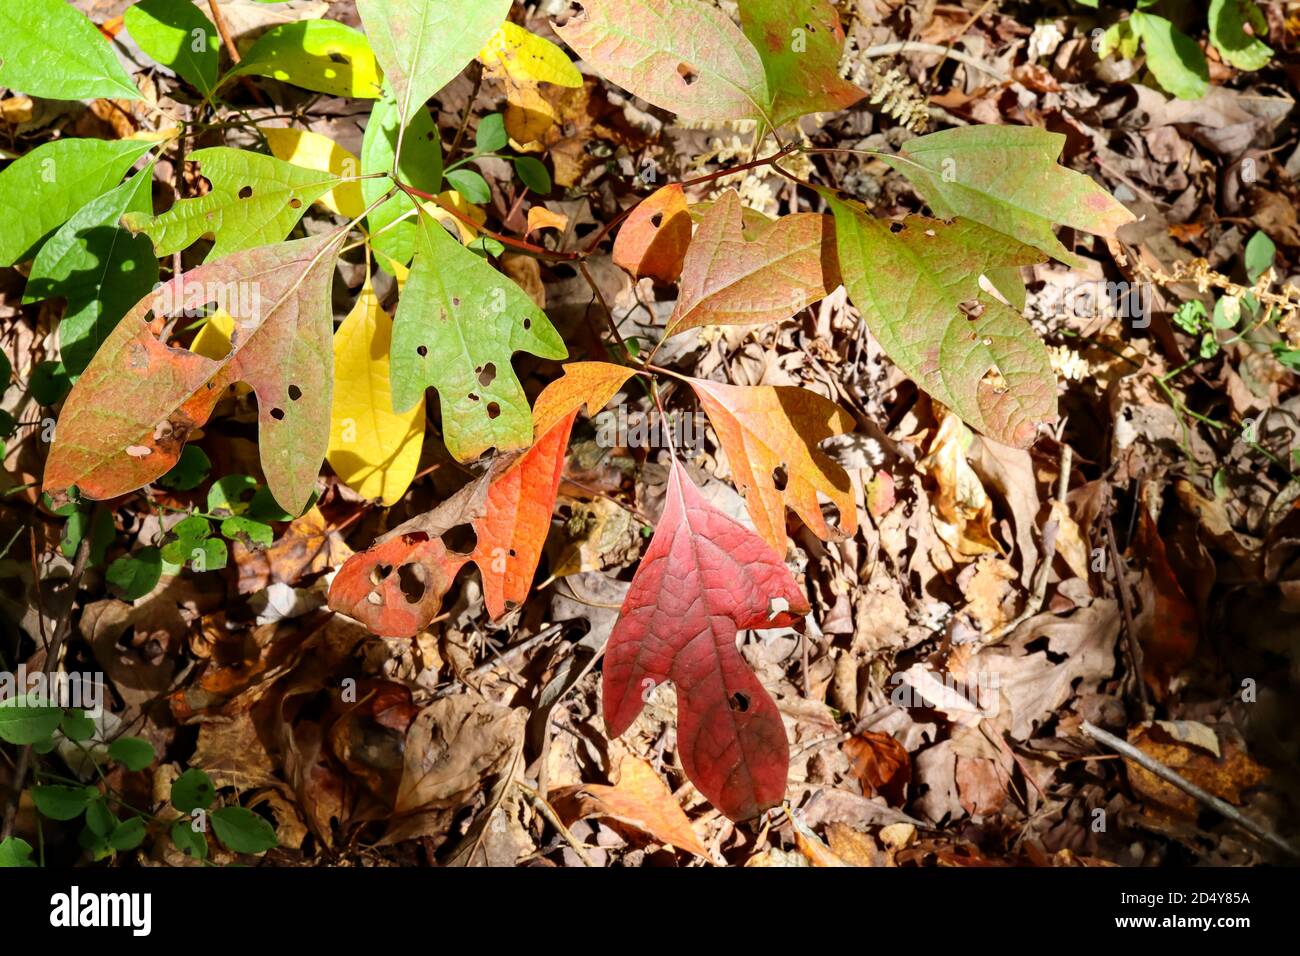 The one, two, and three lobed leaves of the Sassafras tree (Sassafras albidum) can turn varying shades of yellow, orange, and red. Stock Photo